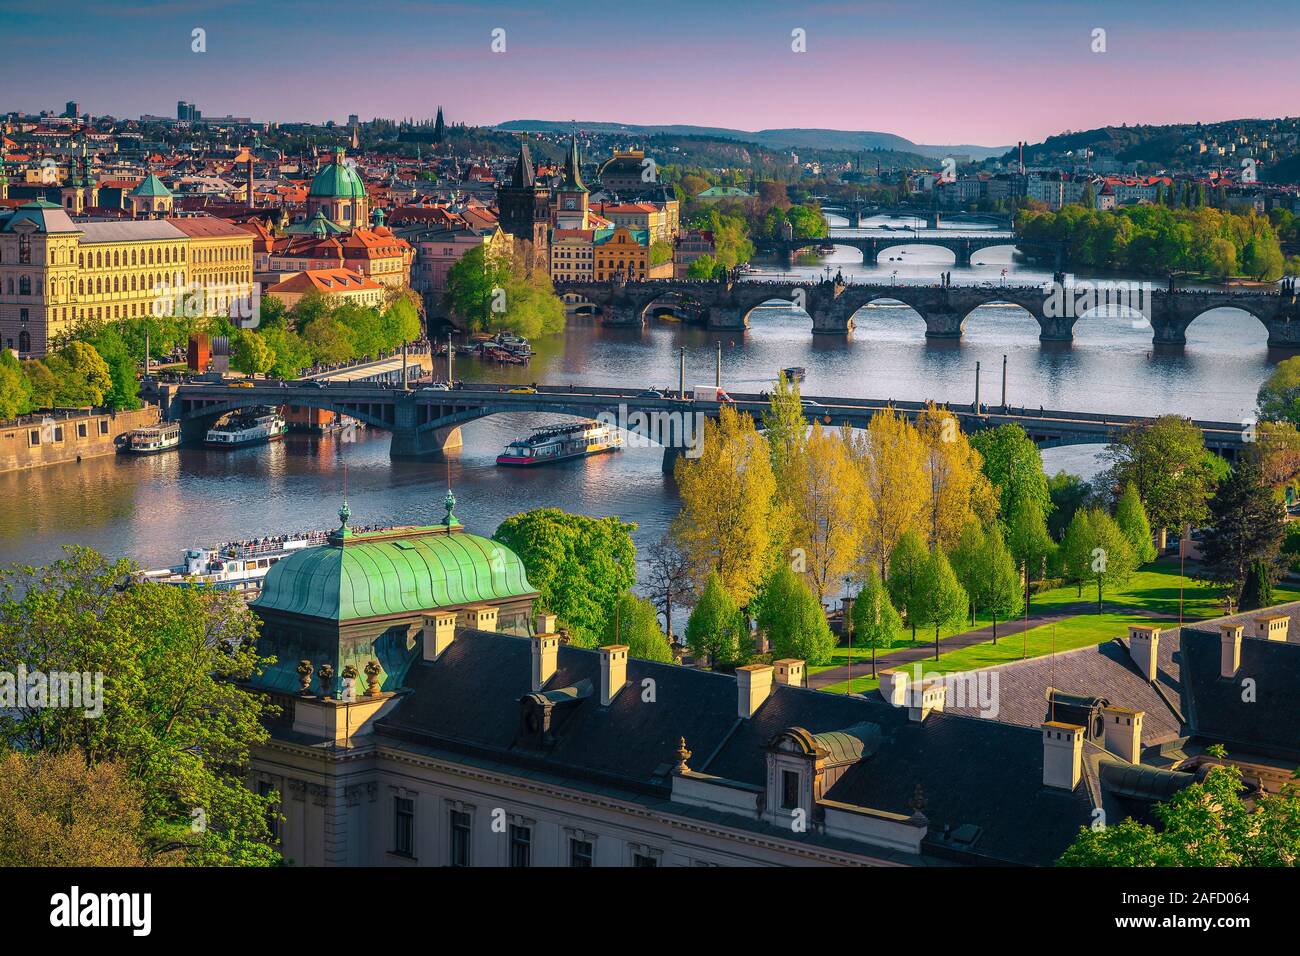 Amazing travel destination with bridges and historic buildings. Spring location with colorful buildings and Vltava river, Prague, Czech Republic, Euro Stock Photo